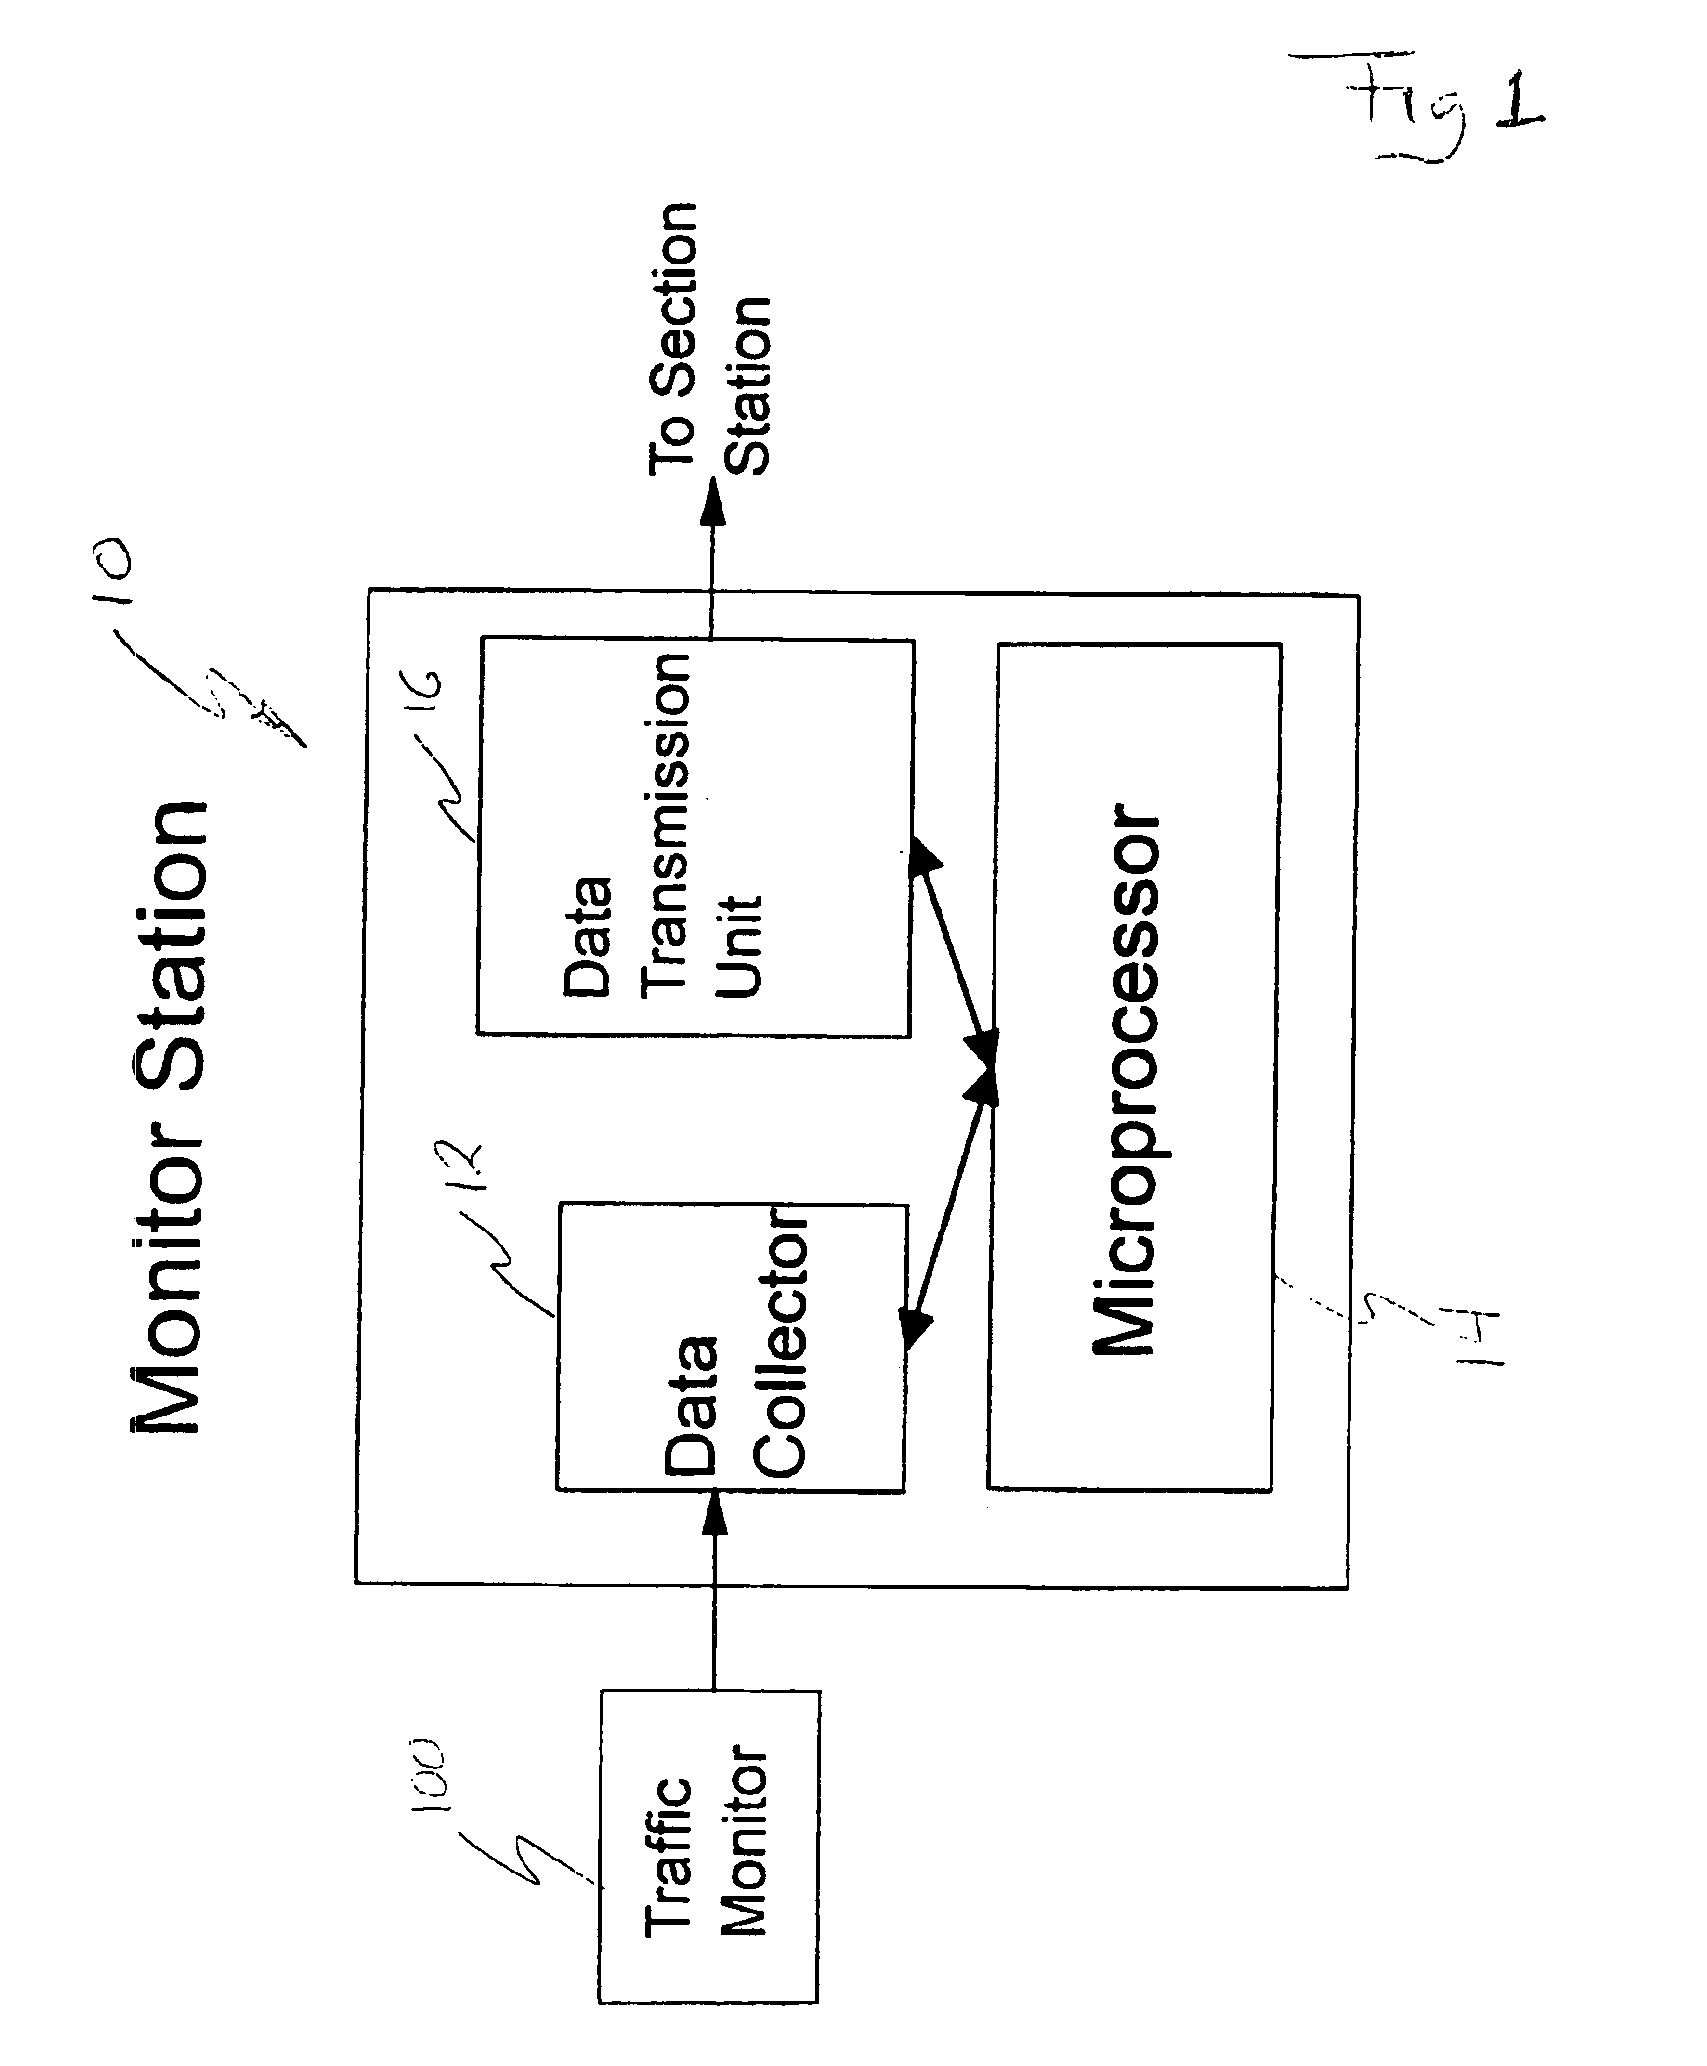 Traffic flow and route selection display system for routing vehicles